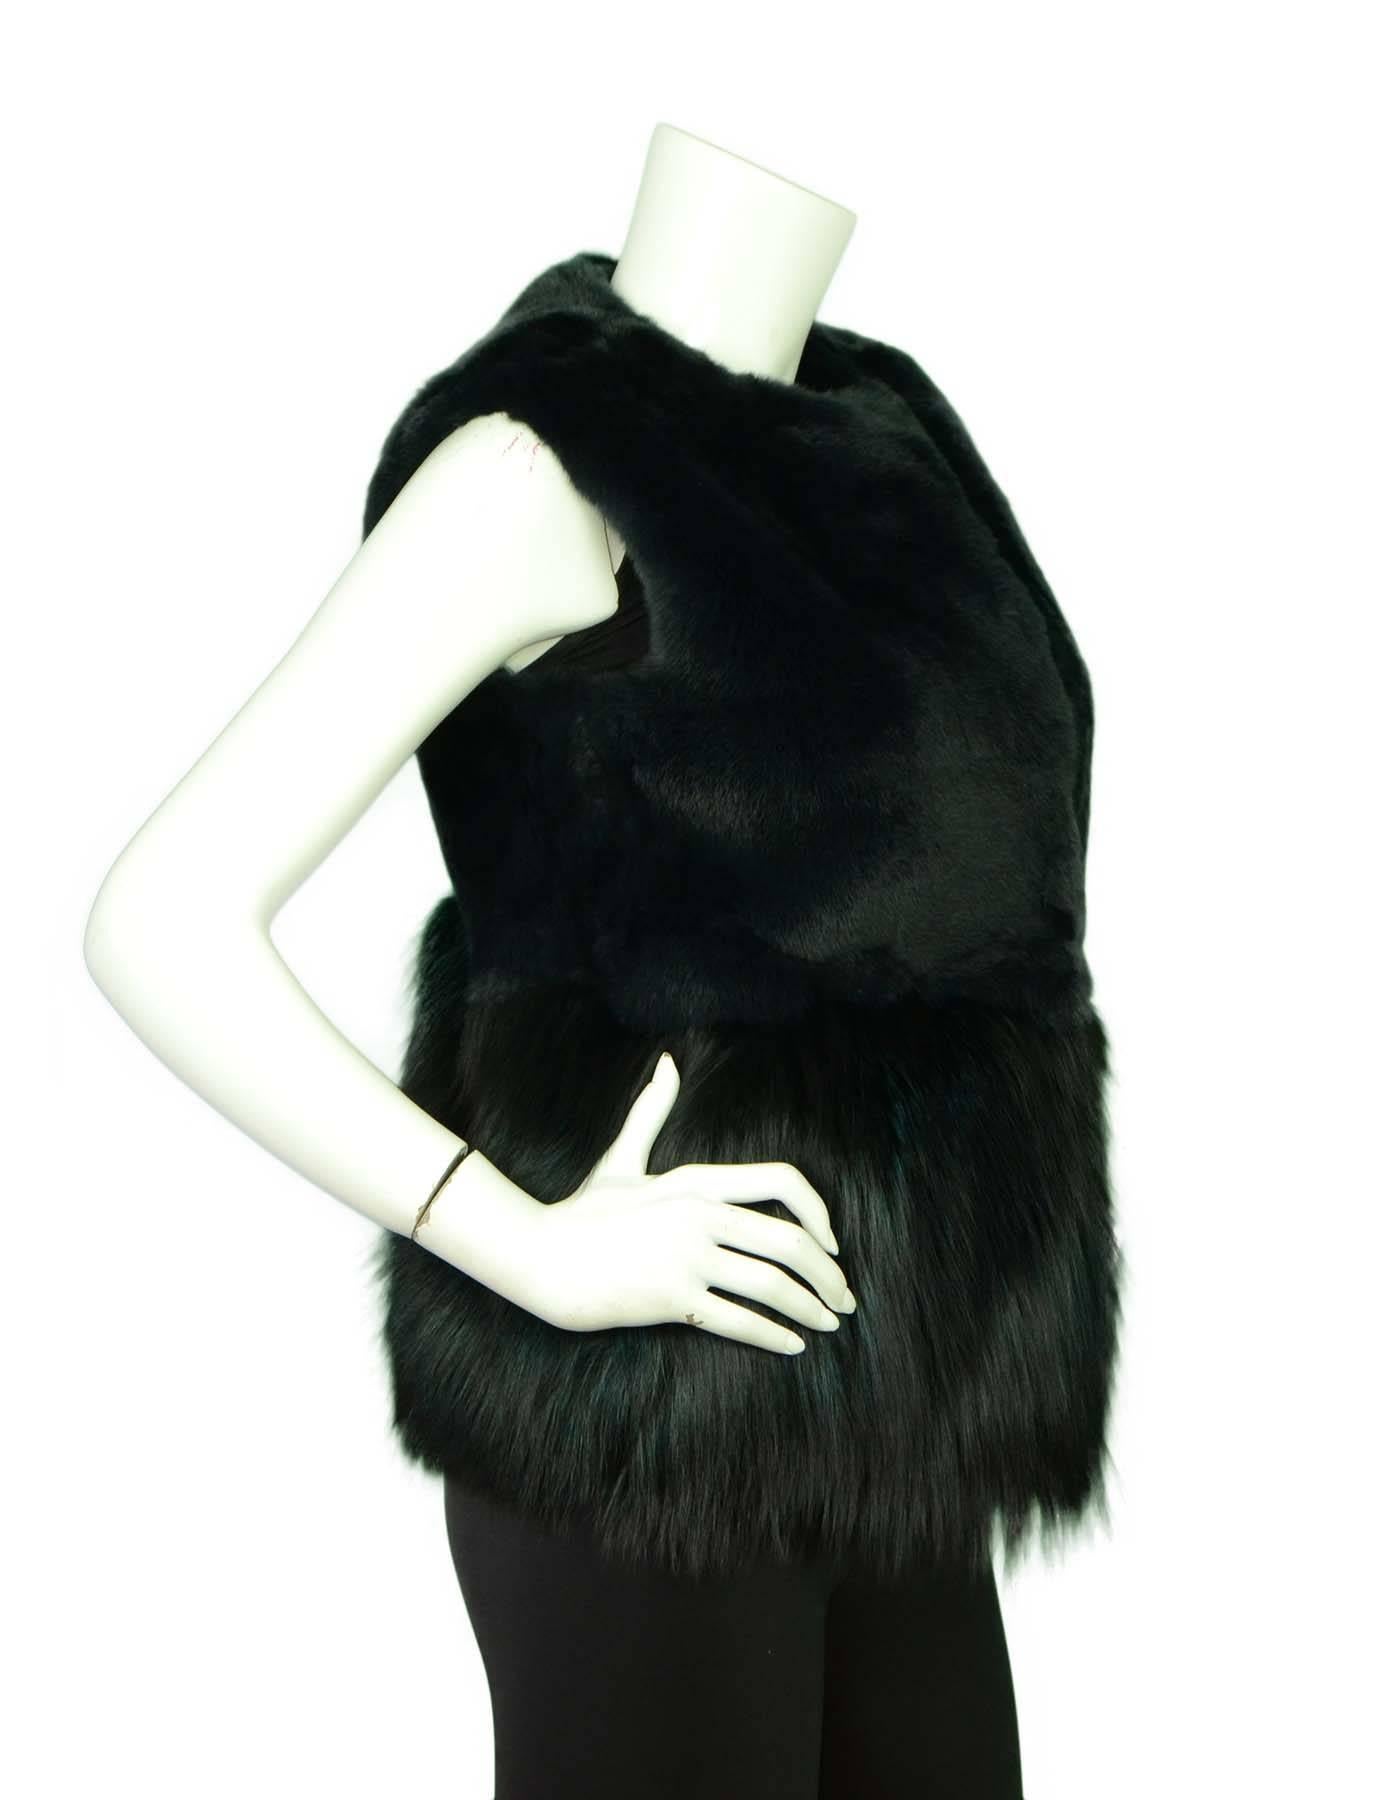 Co Bottle Green Fox and Rabbit Fur Vest Sz Small

Features oversize fit

Made In: China
Color: Bottle green
Composition: Rabbit and fox fur
Lining: 100% Silk lining
Retail Price: $3,500 + tax
Closure/Opening: Hook and eye closure
Exterior